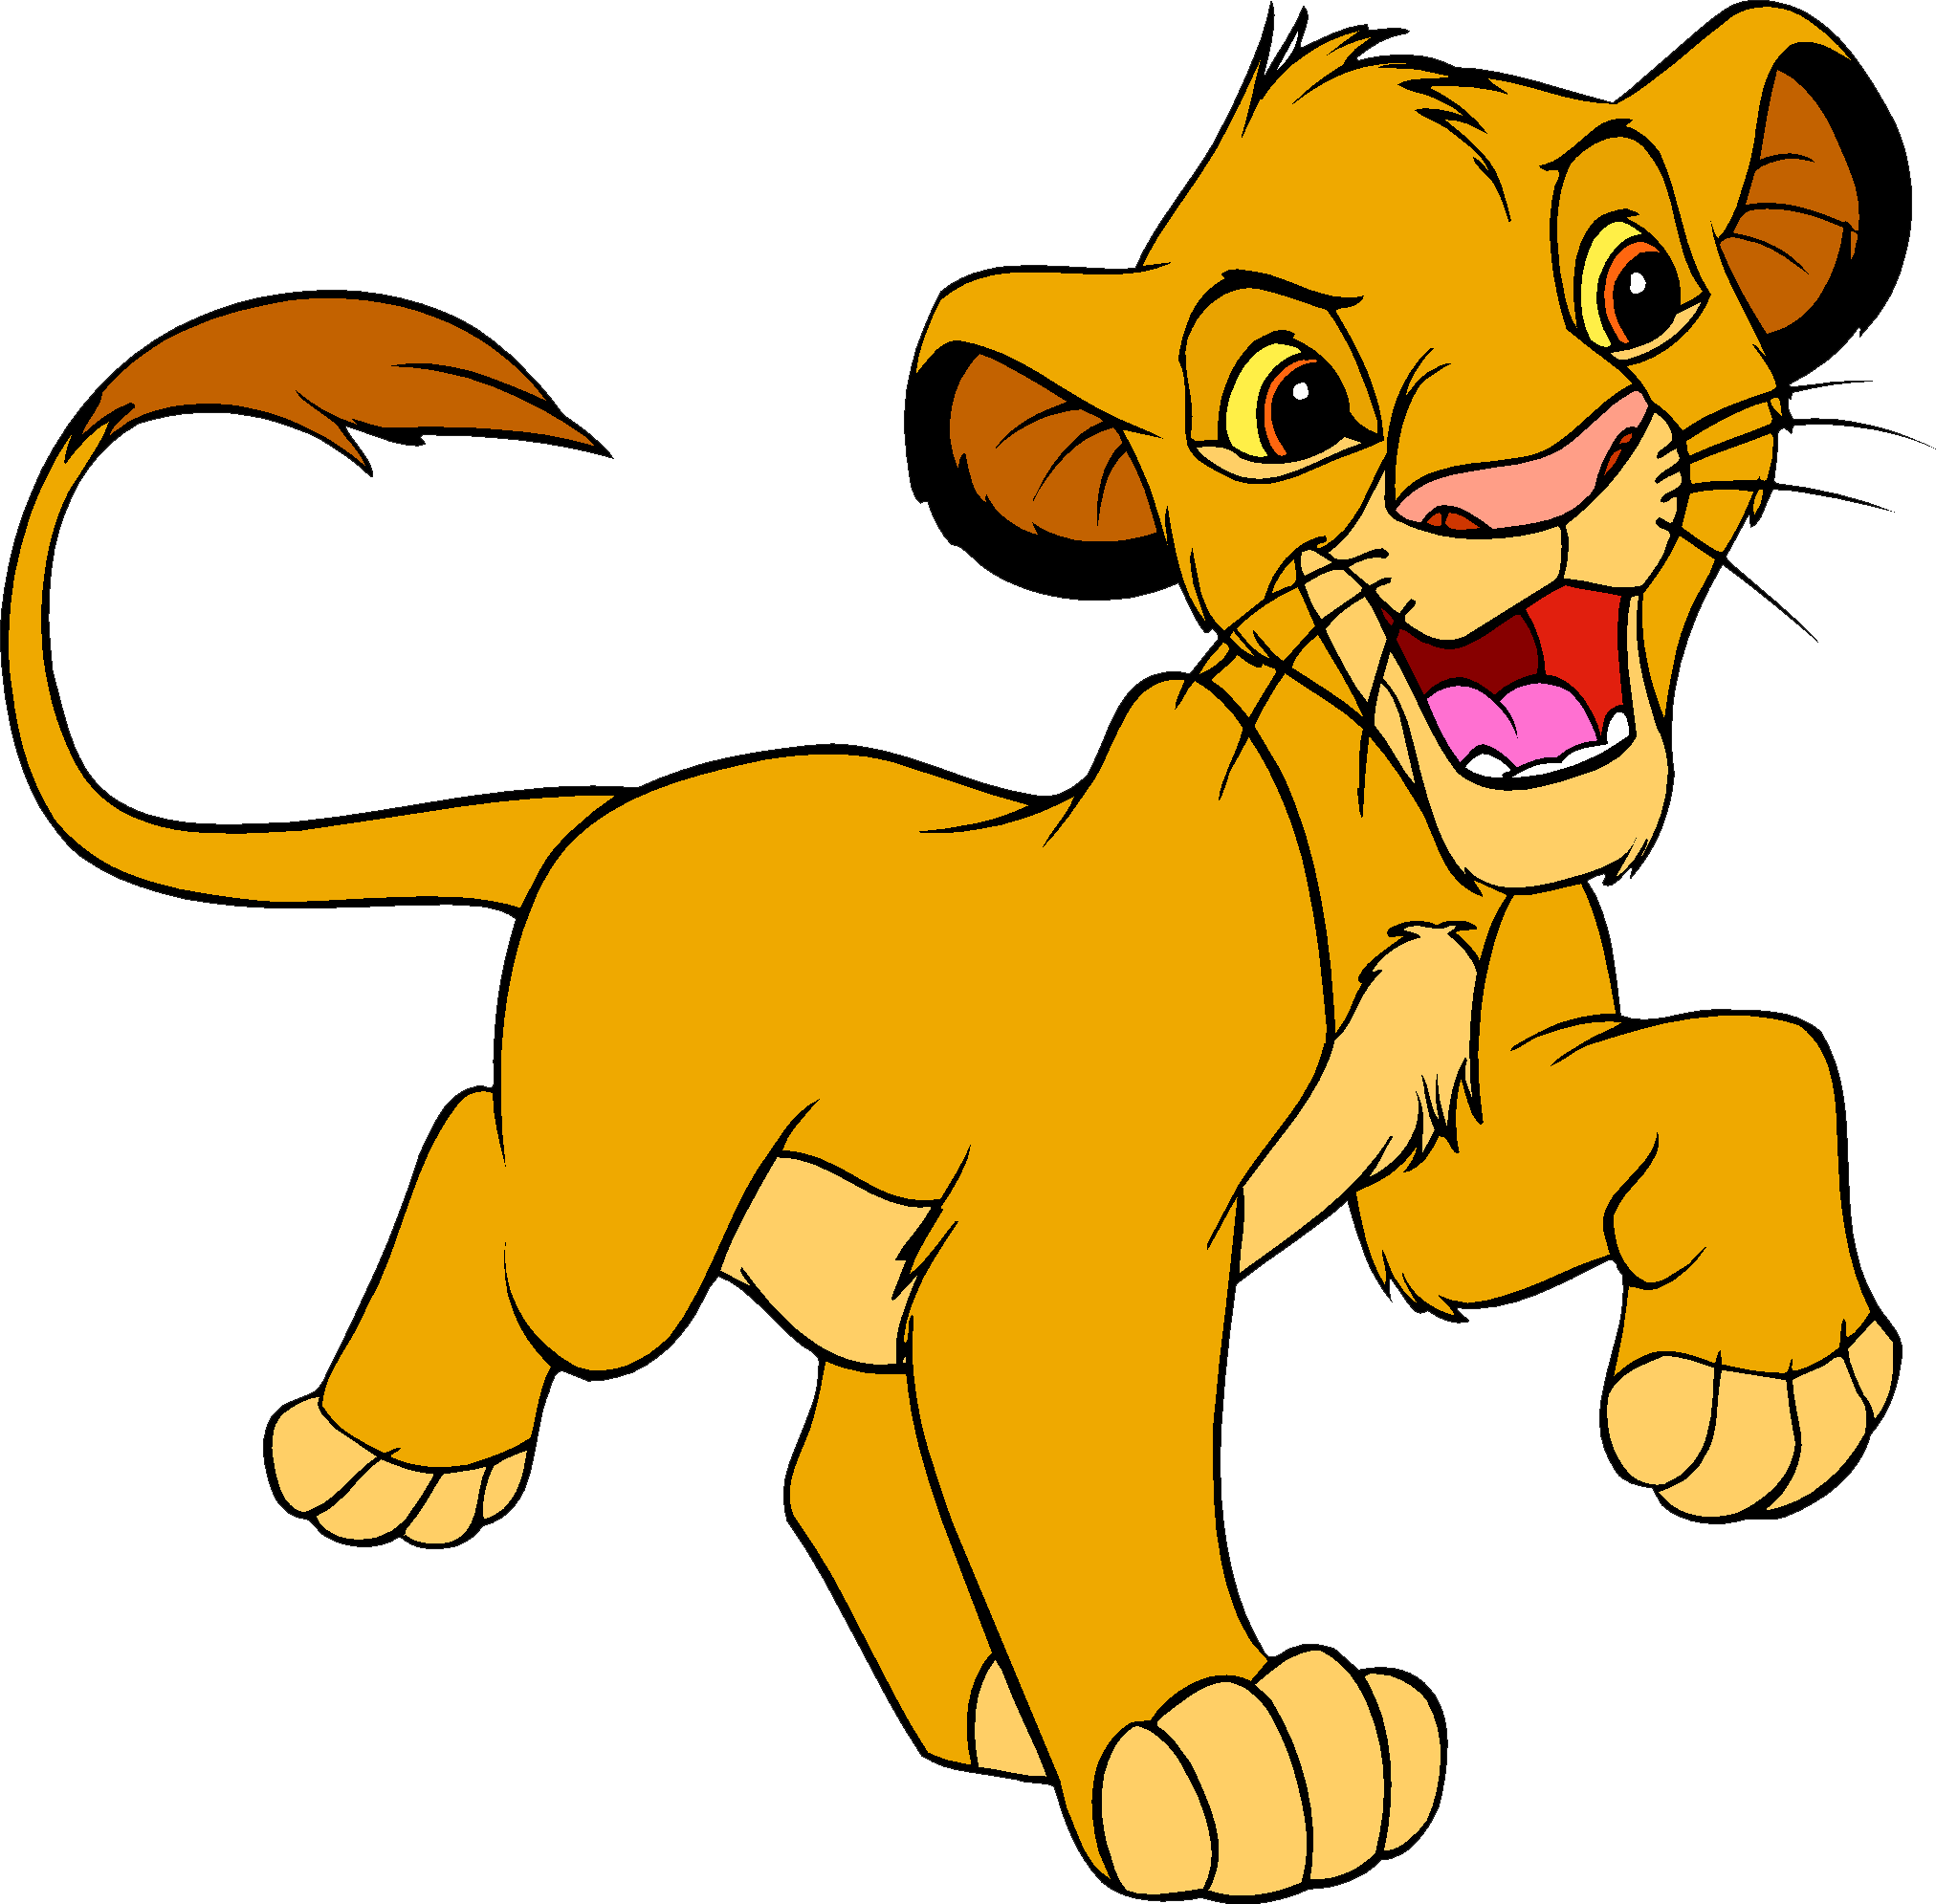 Disney clipart icon. Lion king png image